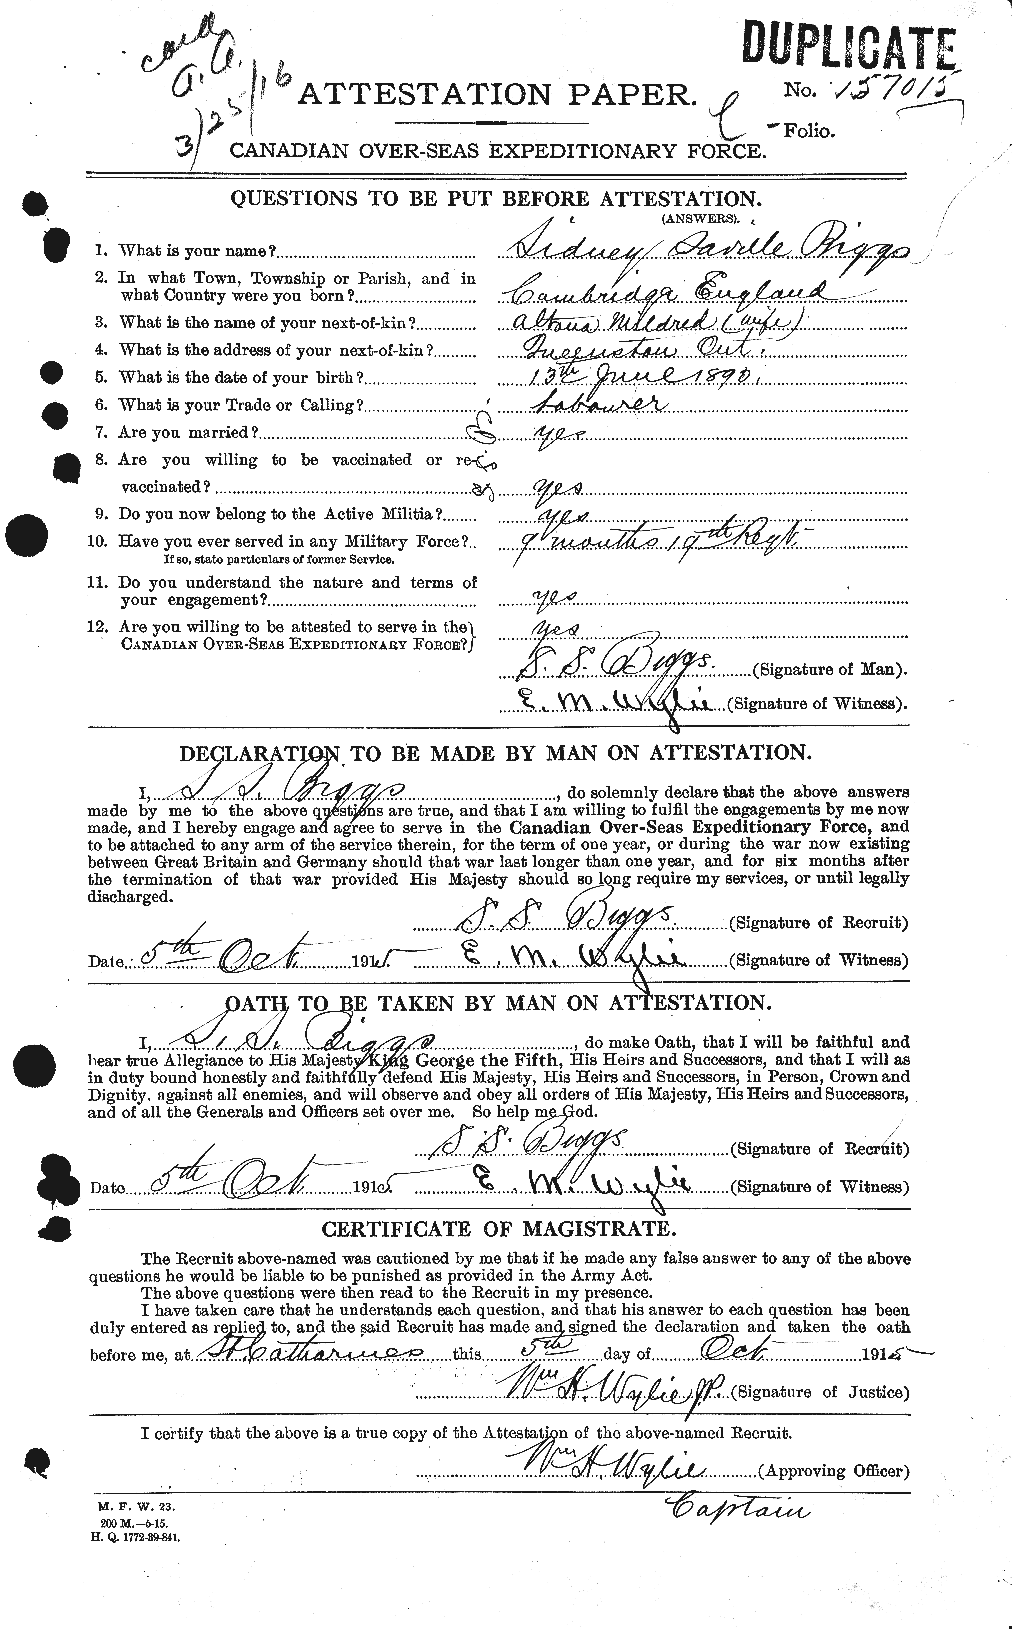 Personnel Records of the First World War - CEF 239159a